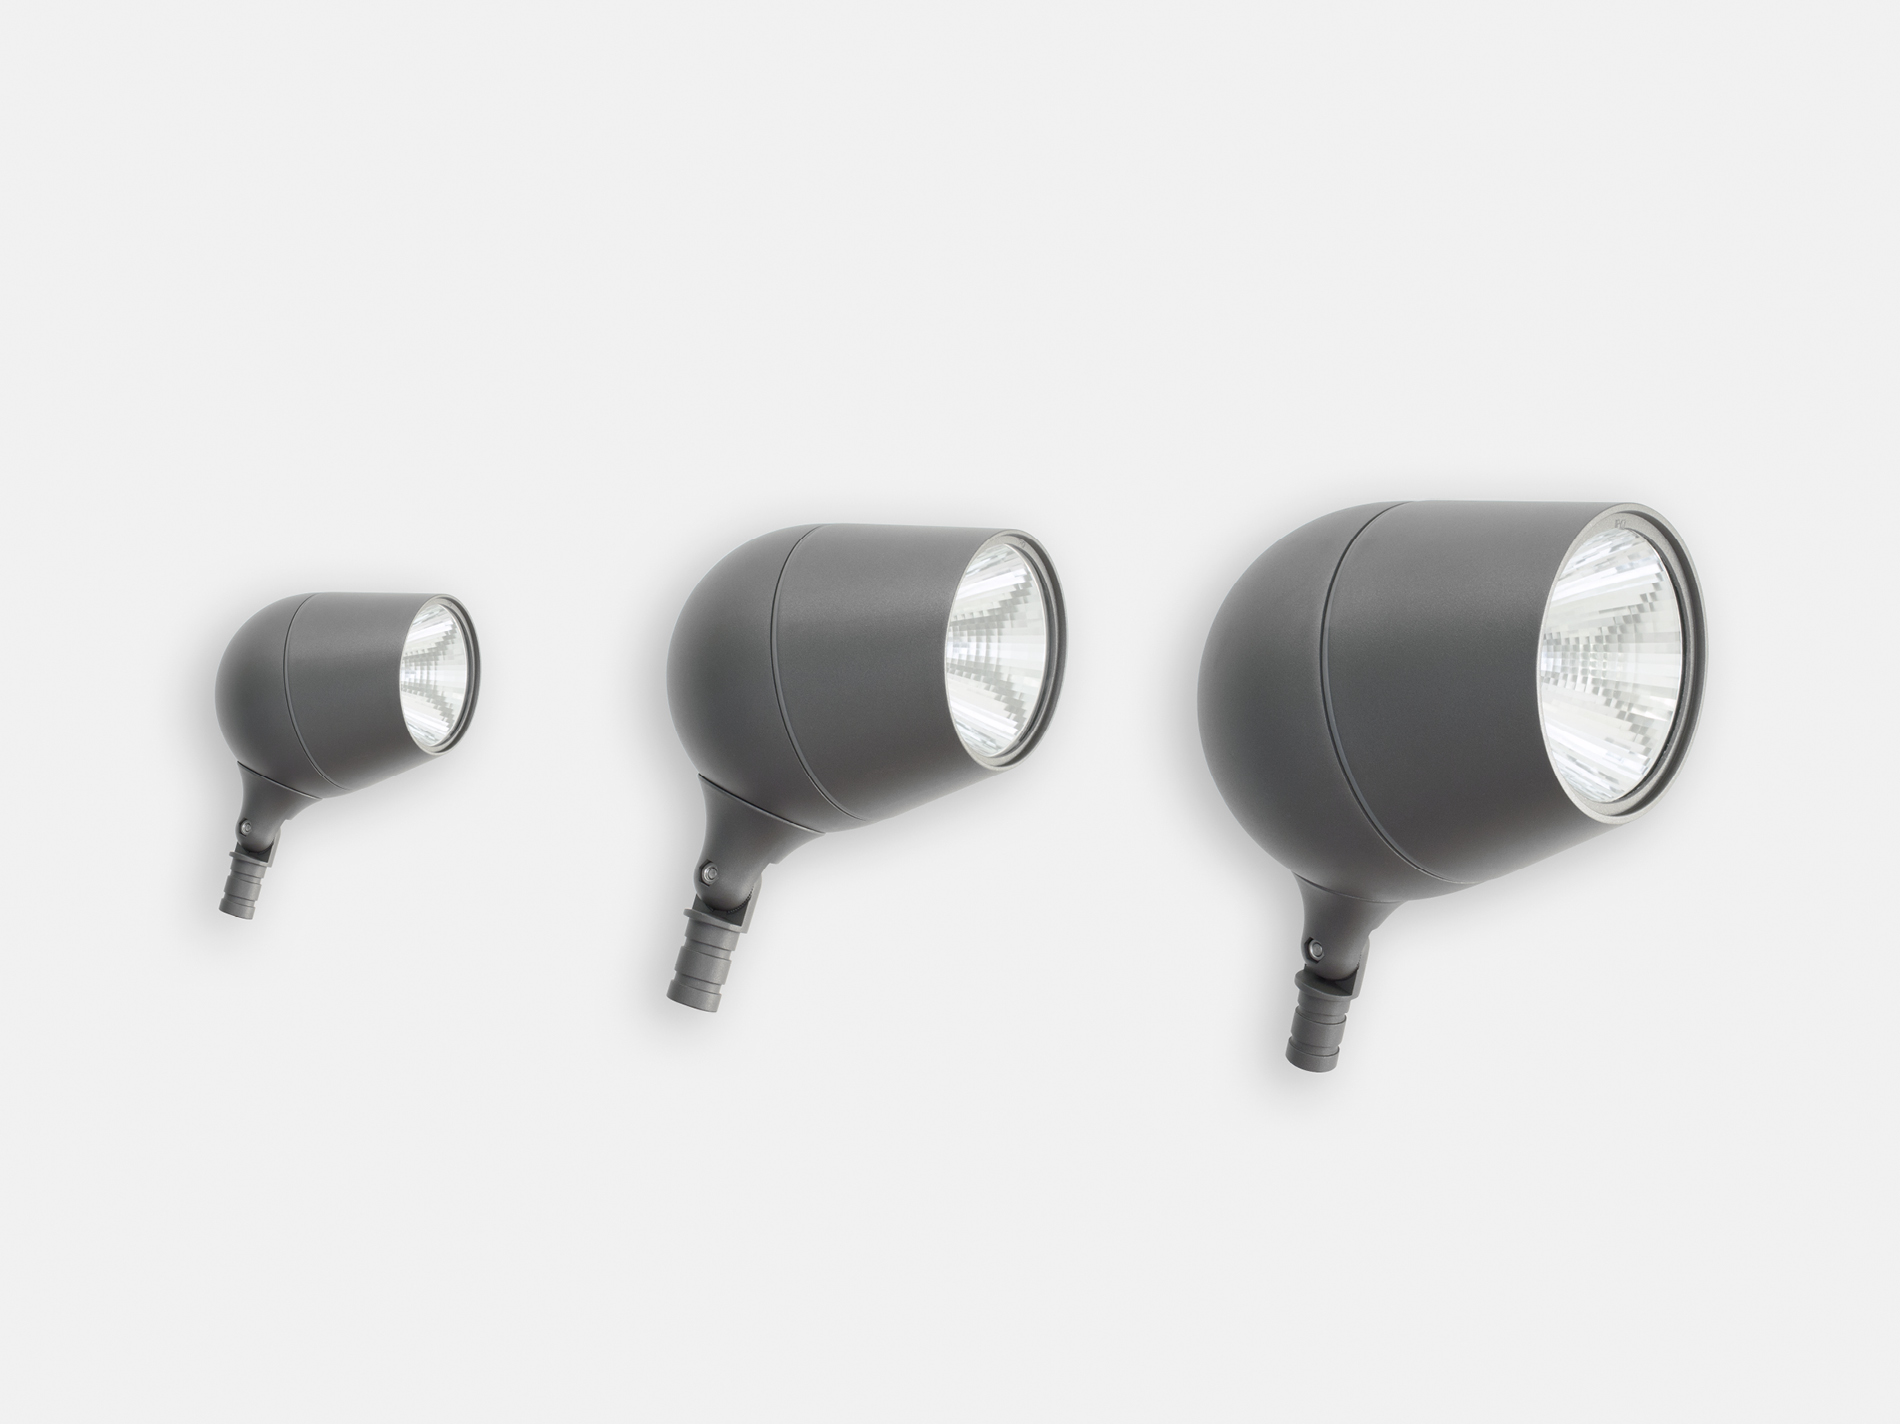 An image of 3 different sizes of the Olivio luminaire side by side on a light grey background.